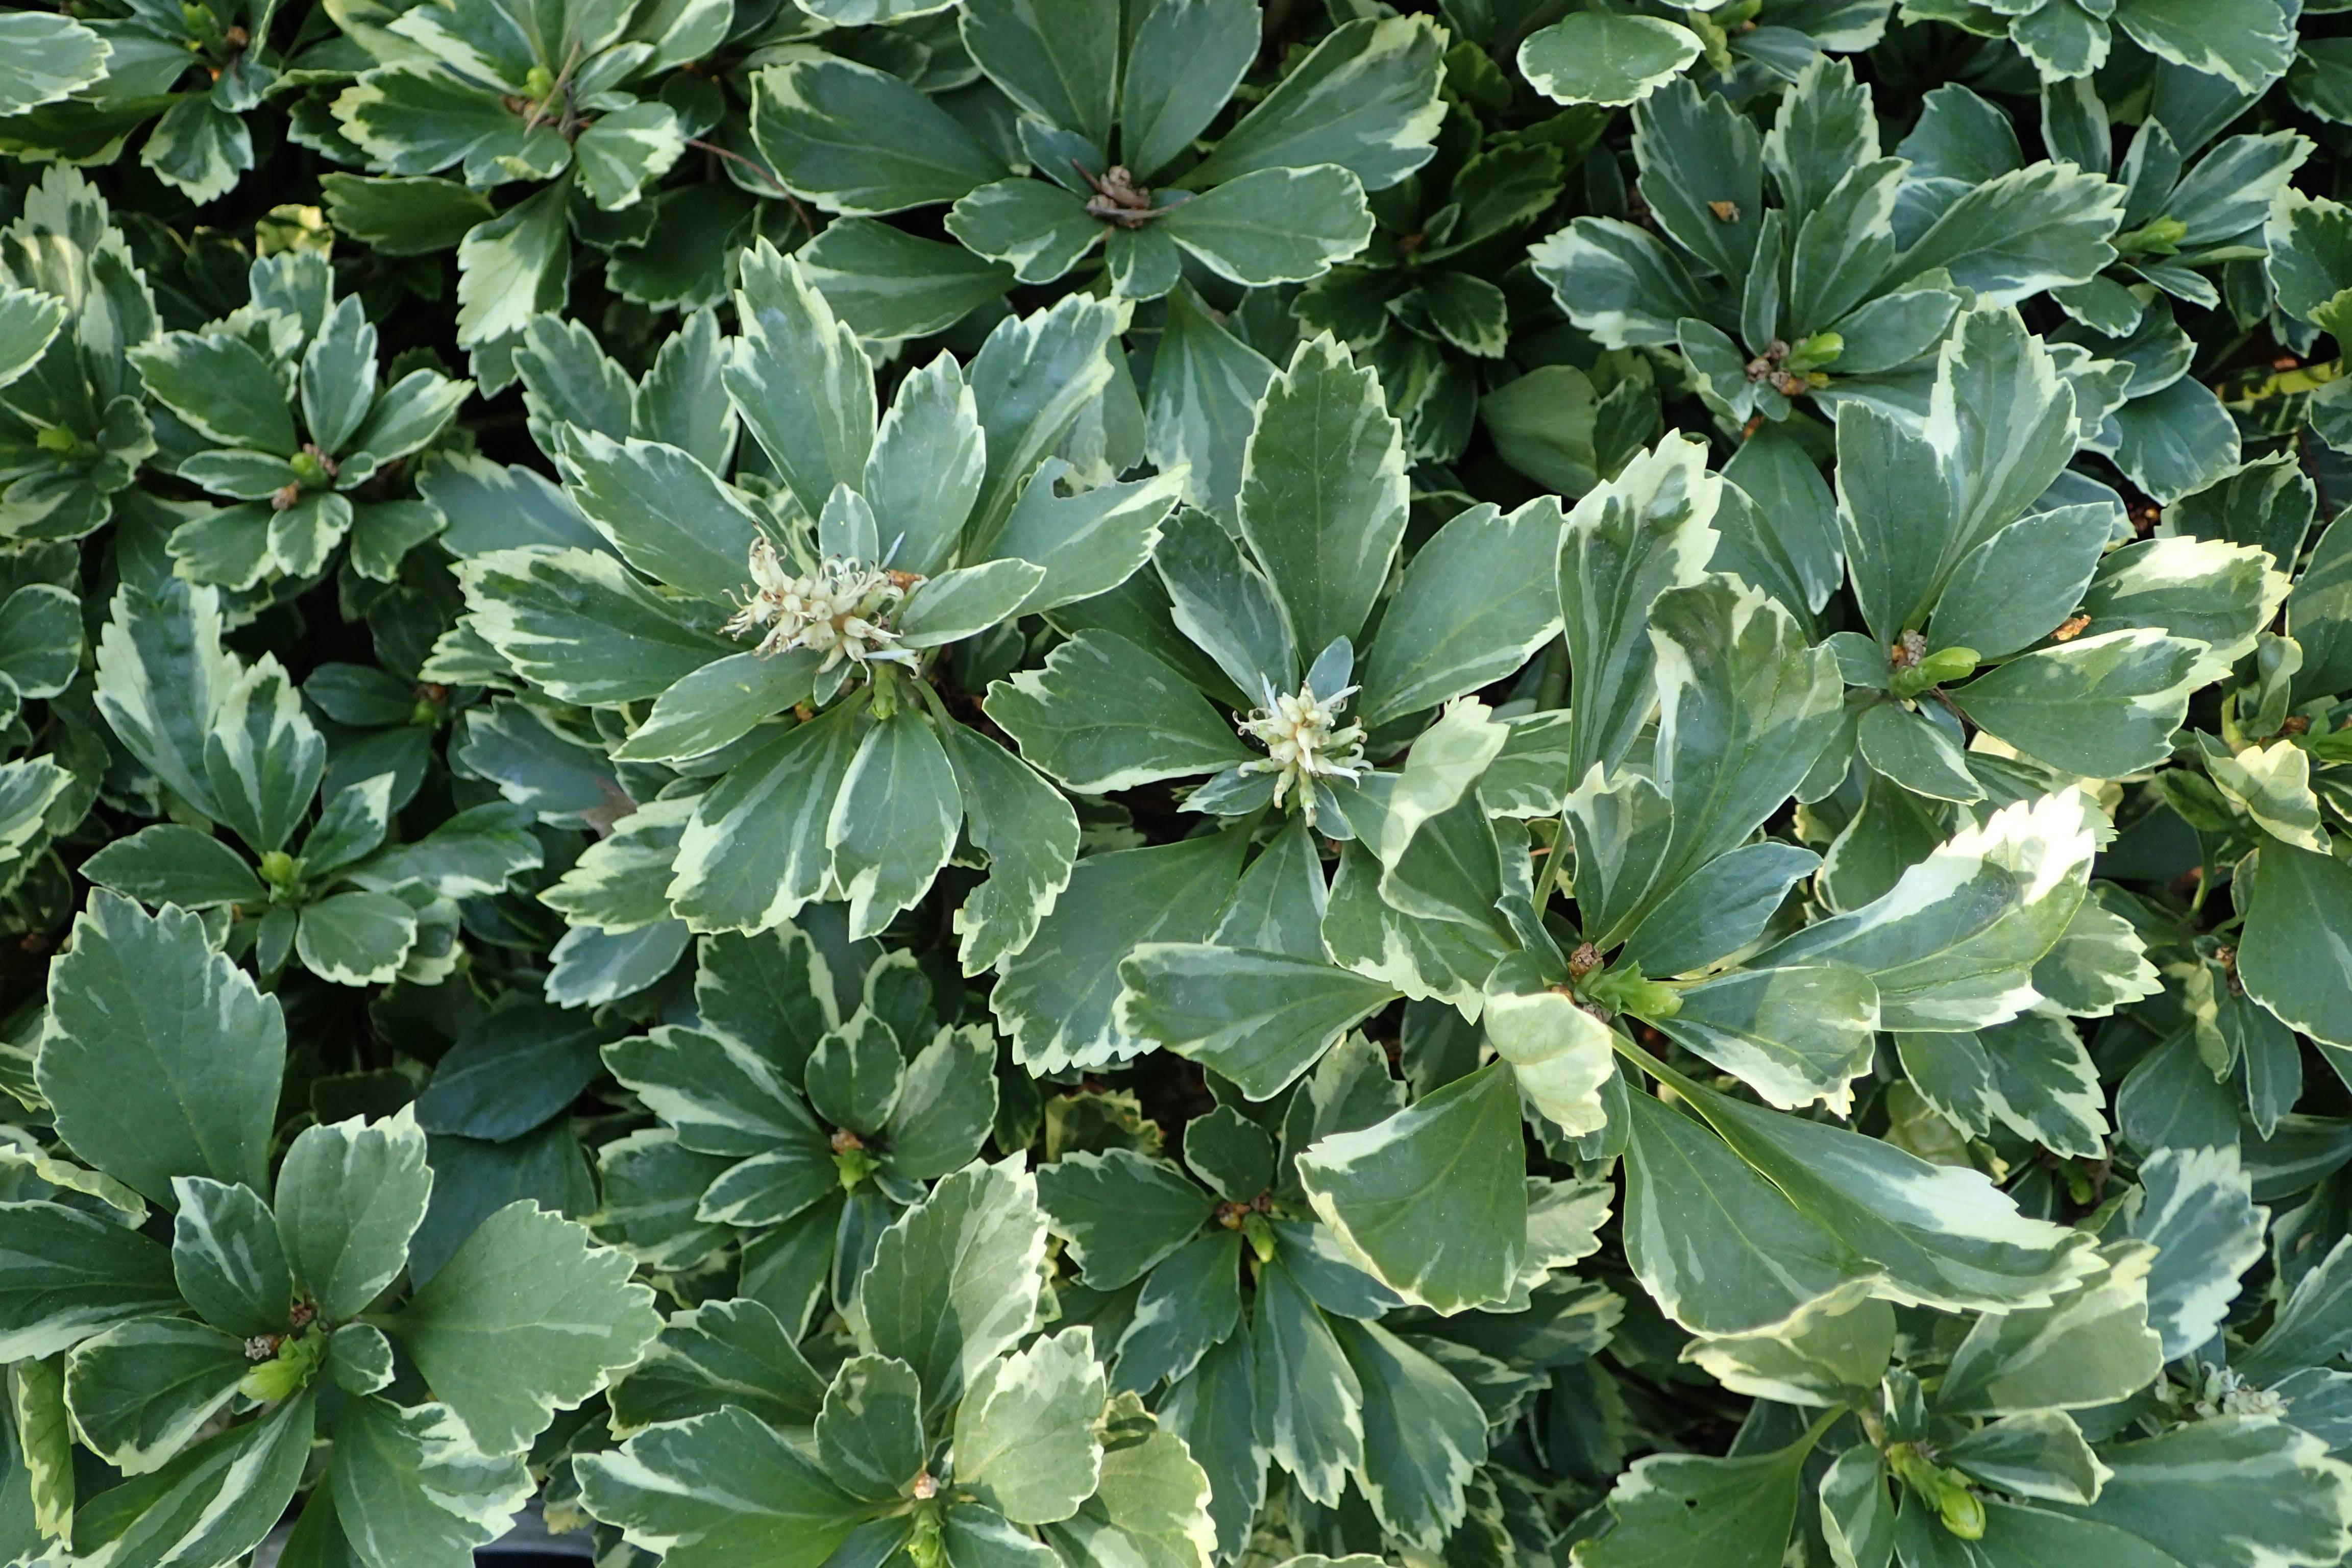 glossy, oval-shaped, dark-green leaves with creamy-white margins, and clusters of tubular-shaped, creamy-white, small flowers 